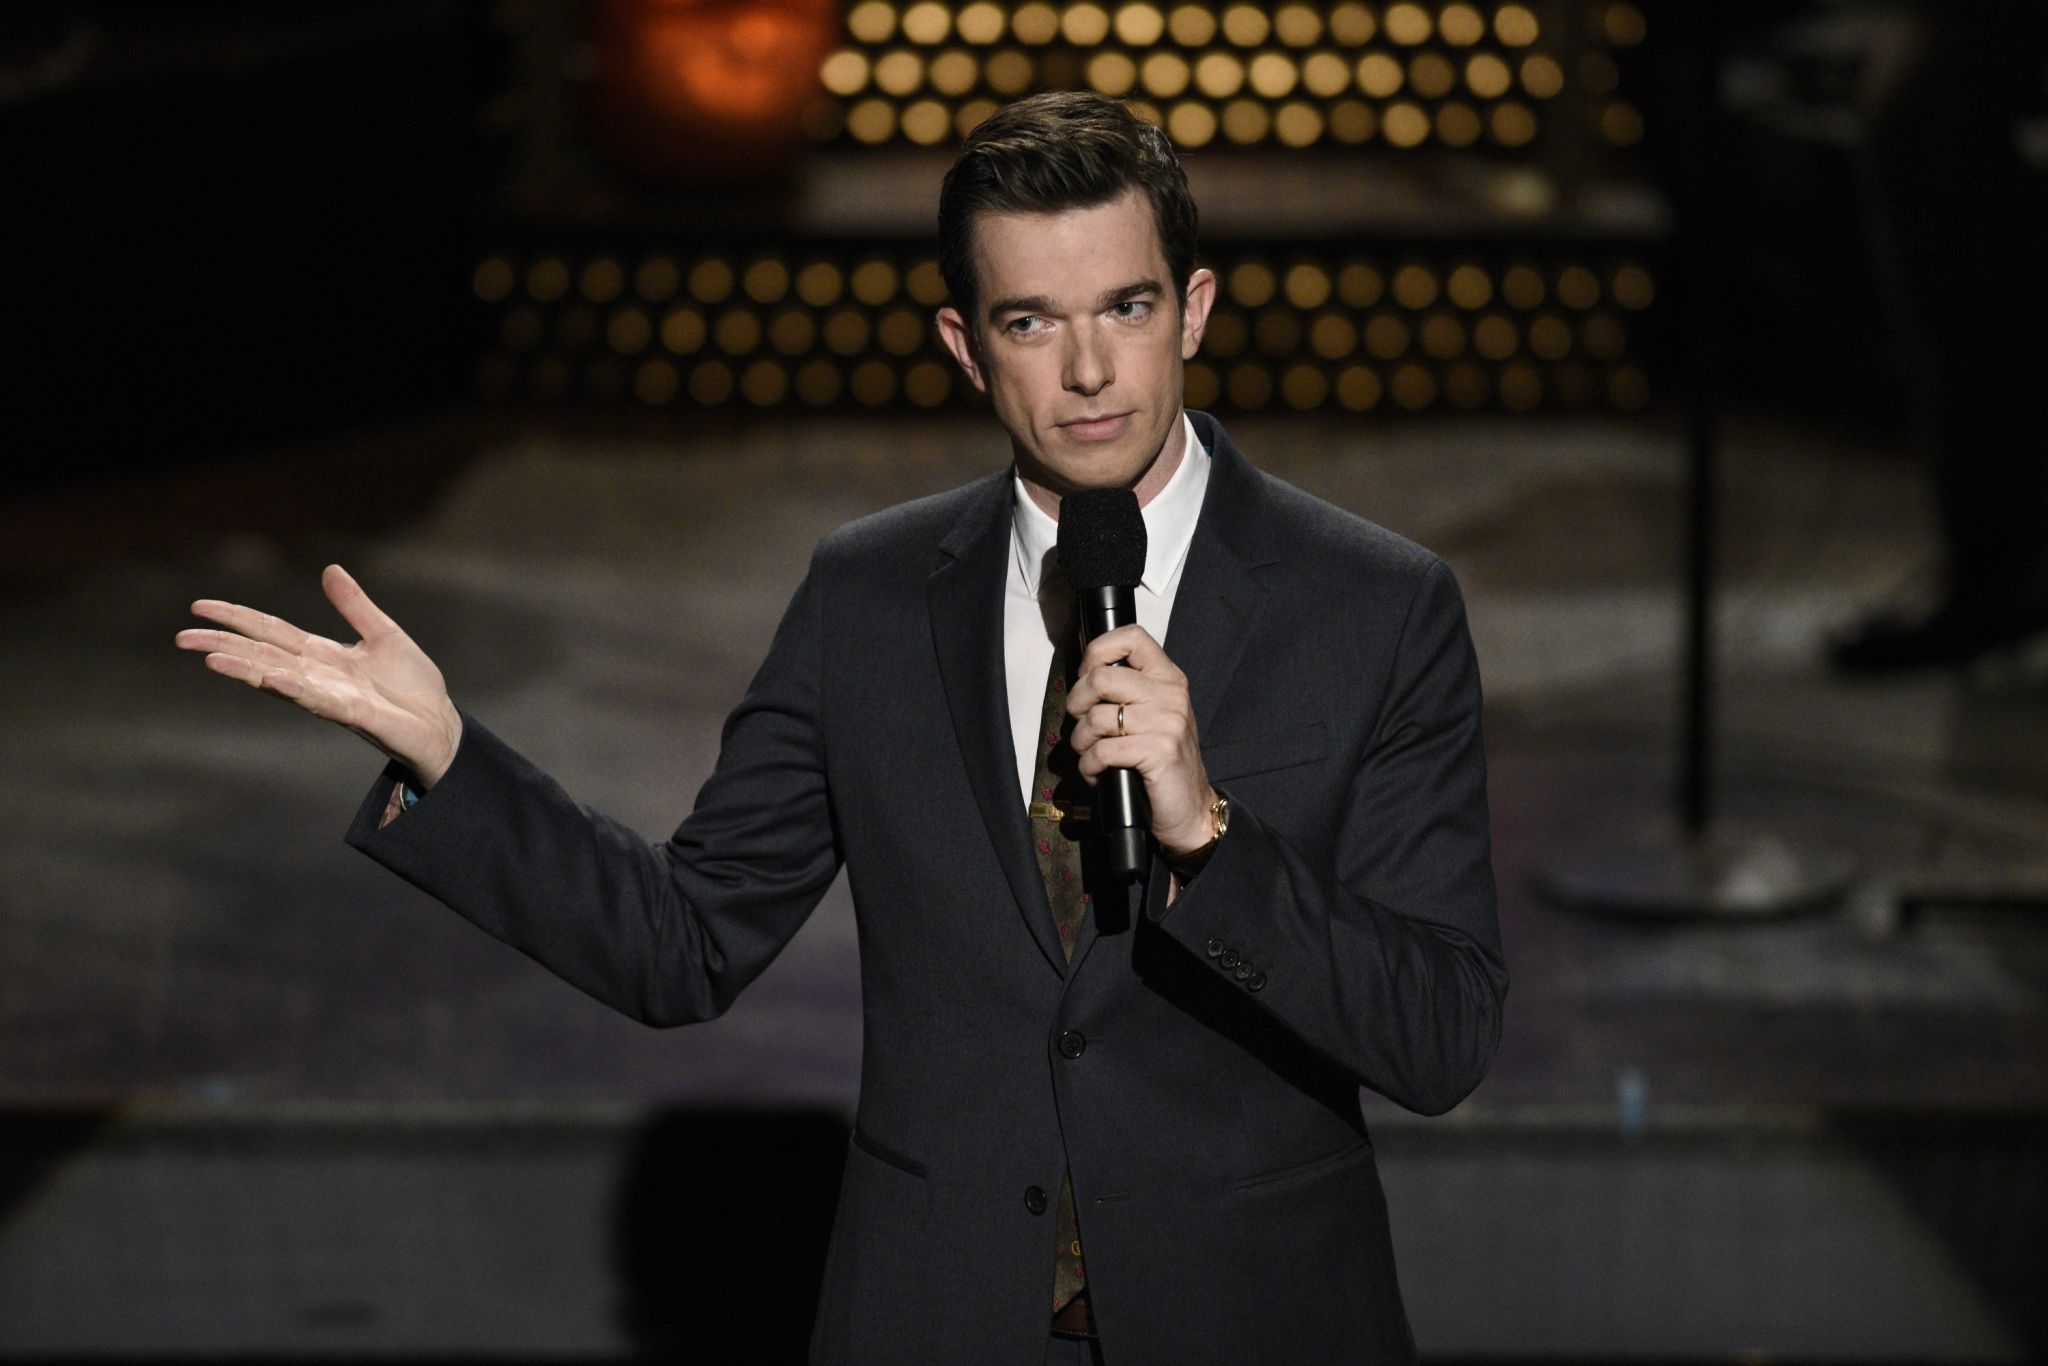 John Mulaney Connecticut From Scratch tour tickets are on sale Friday